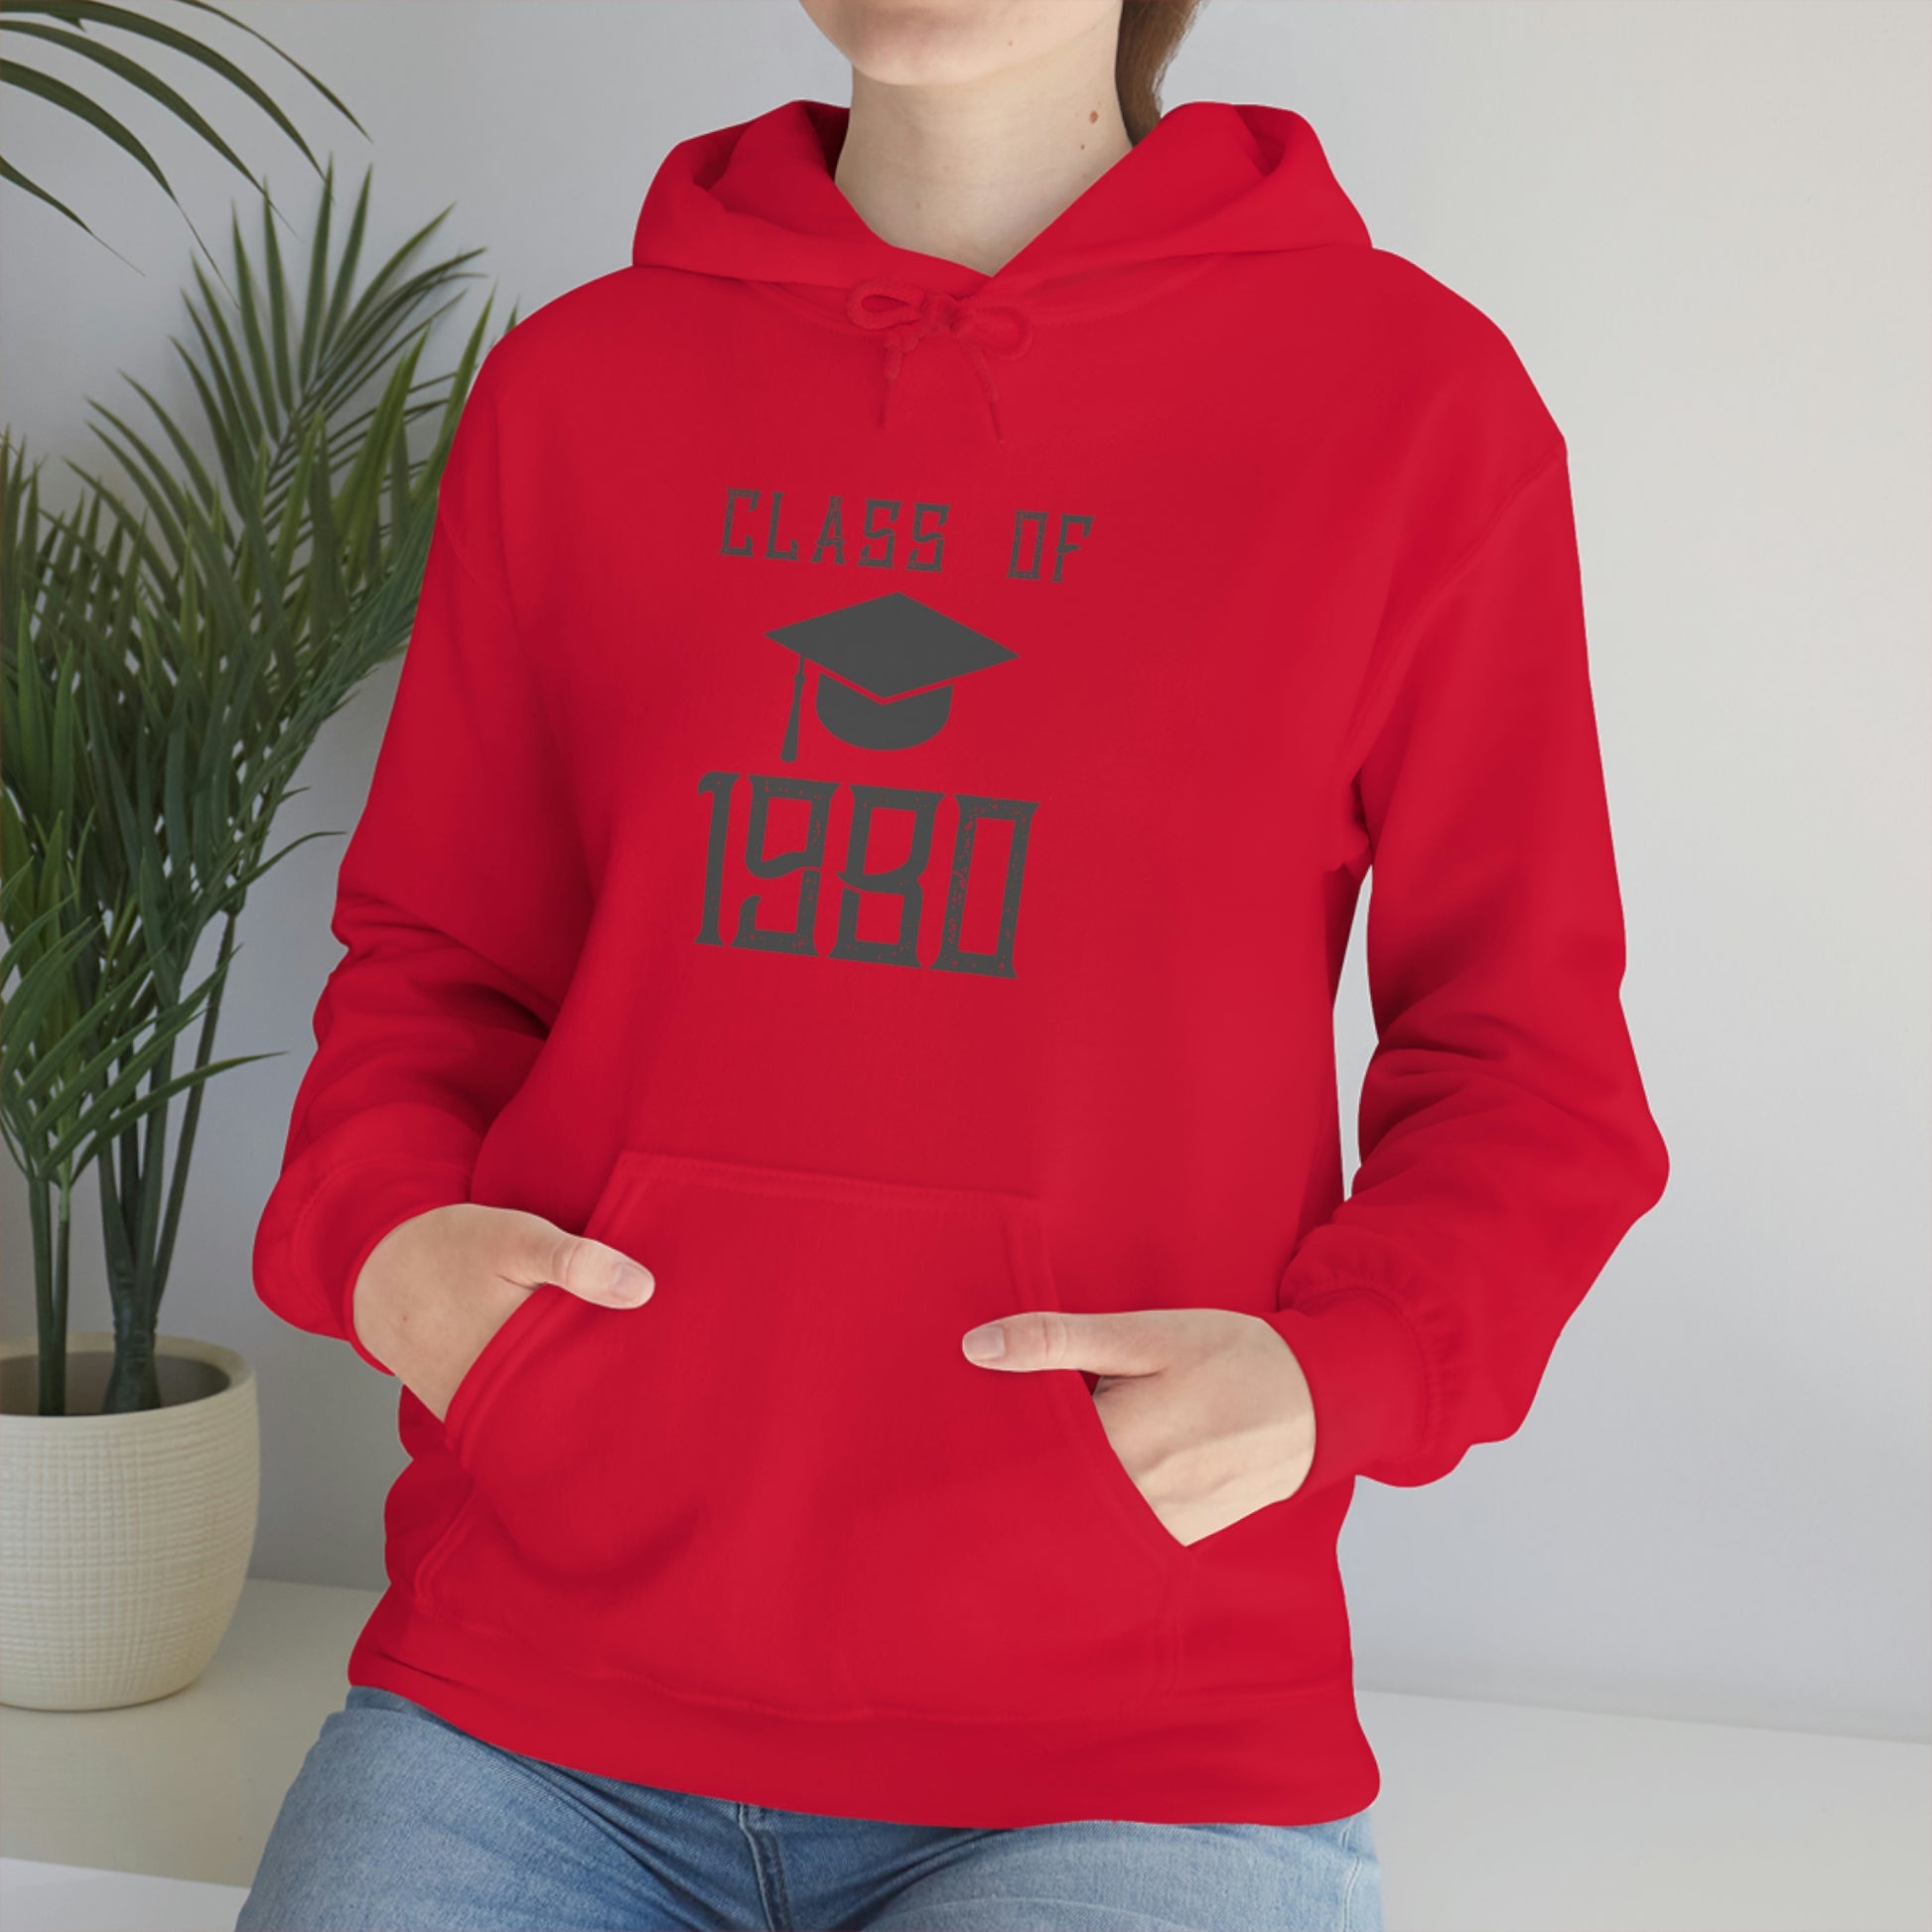 "Class Of 1980" Hoodie - Weave Got Gifts - Unique Gifts You Won’t Find Anywhere Else!